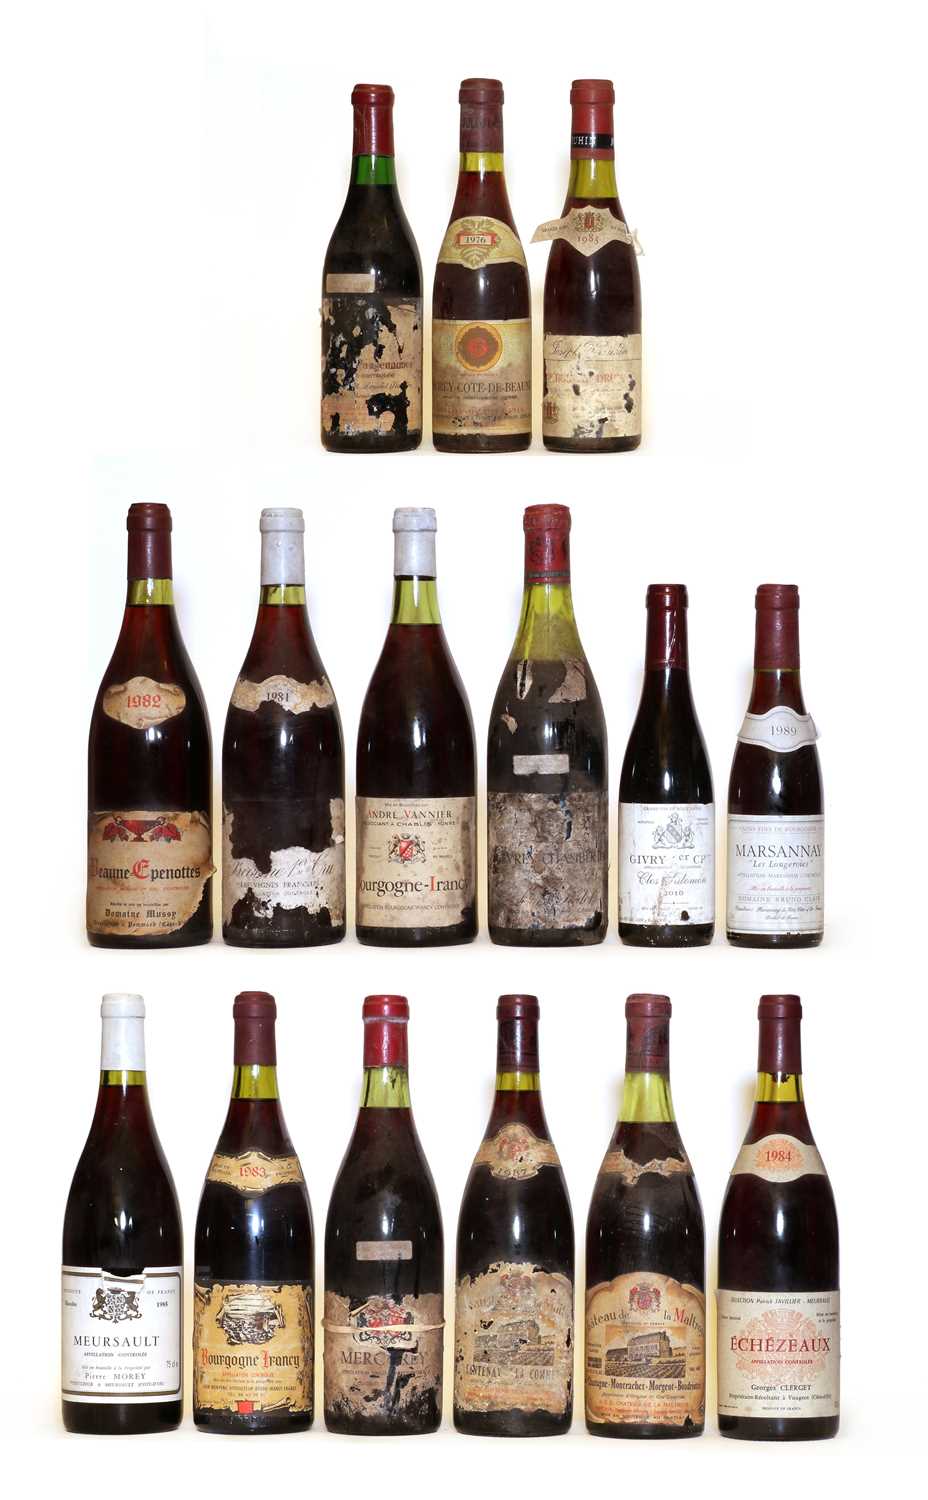 Lot 84 - Assorted Red Burgundy: Echezeaux, Georges Clerget, 1984, one bottle and 14 variously sized others